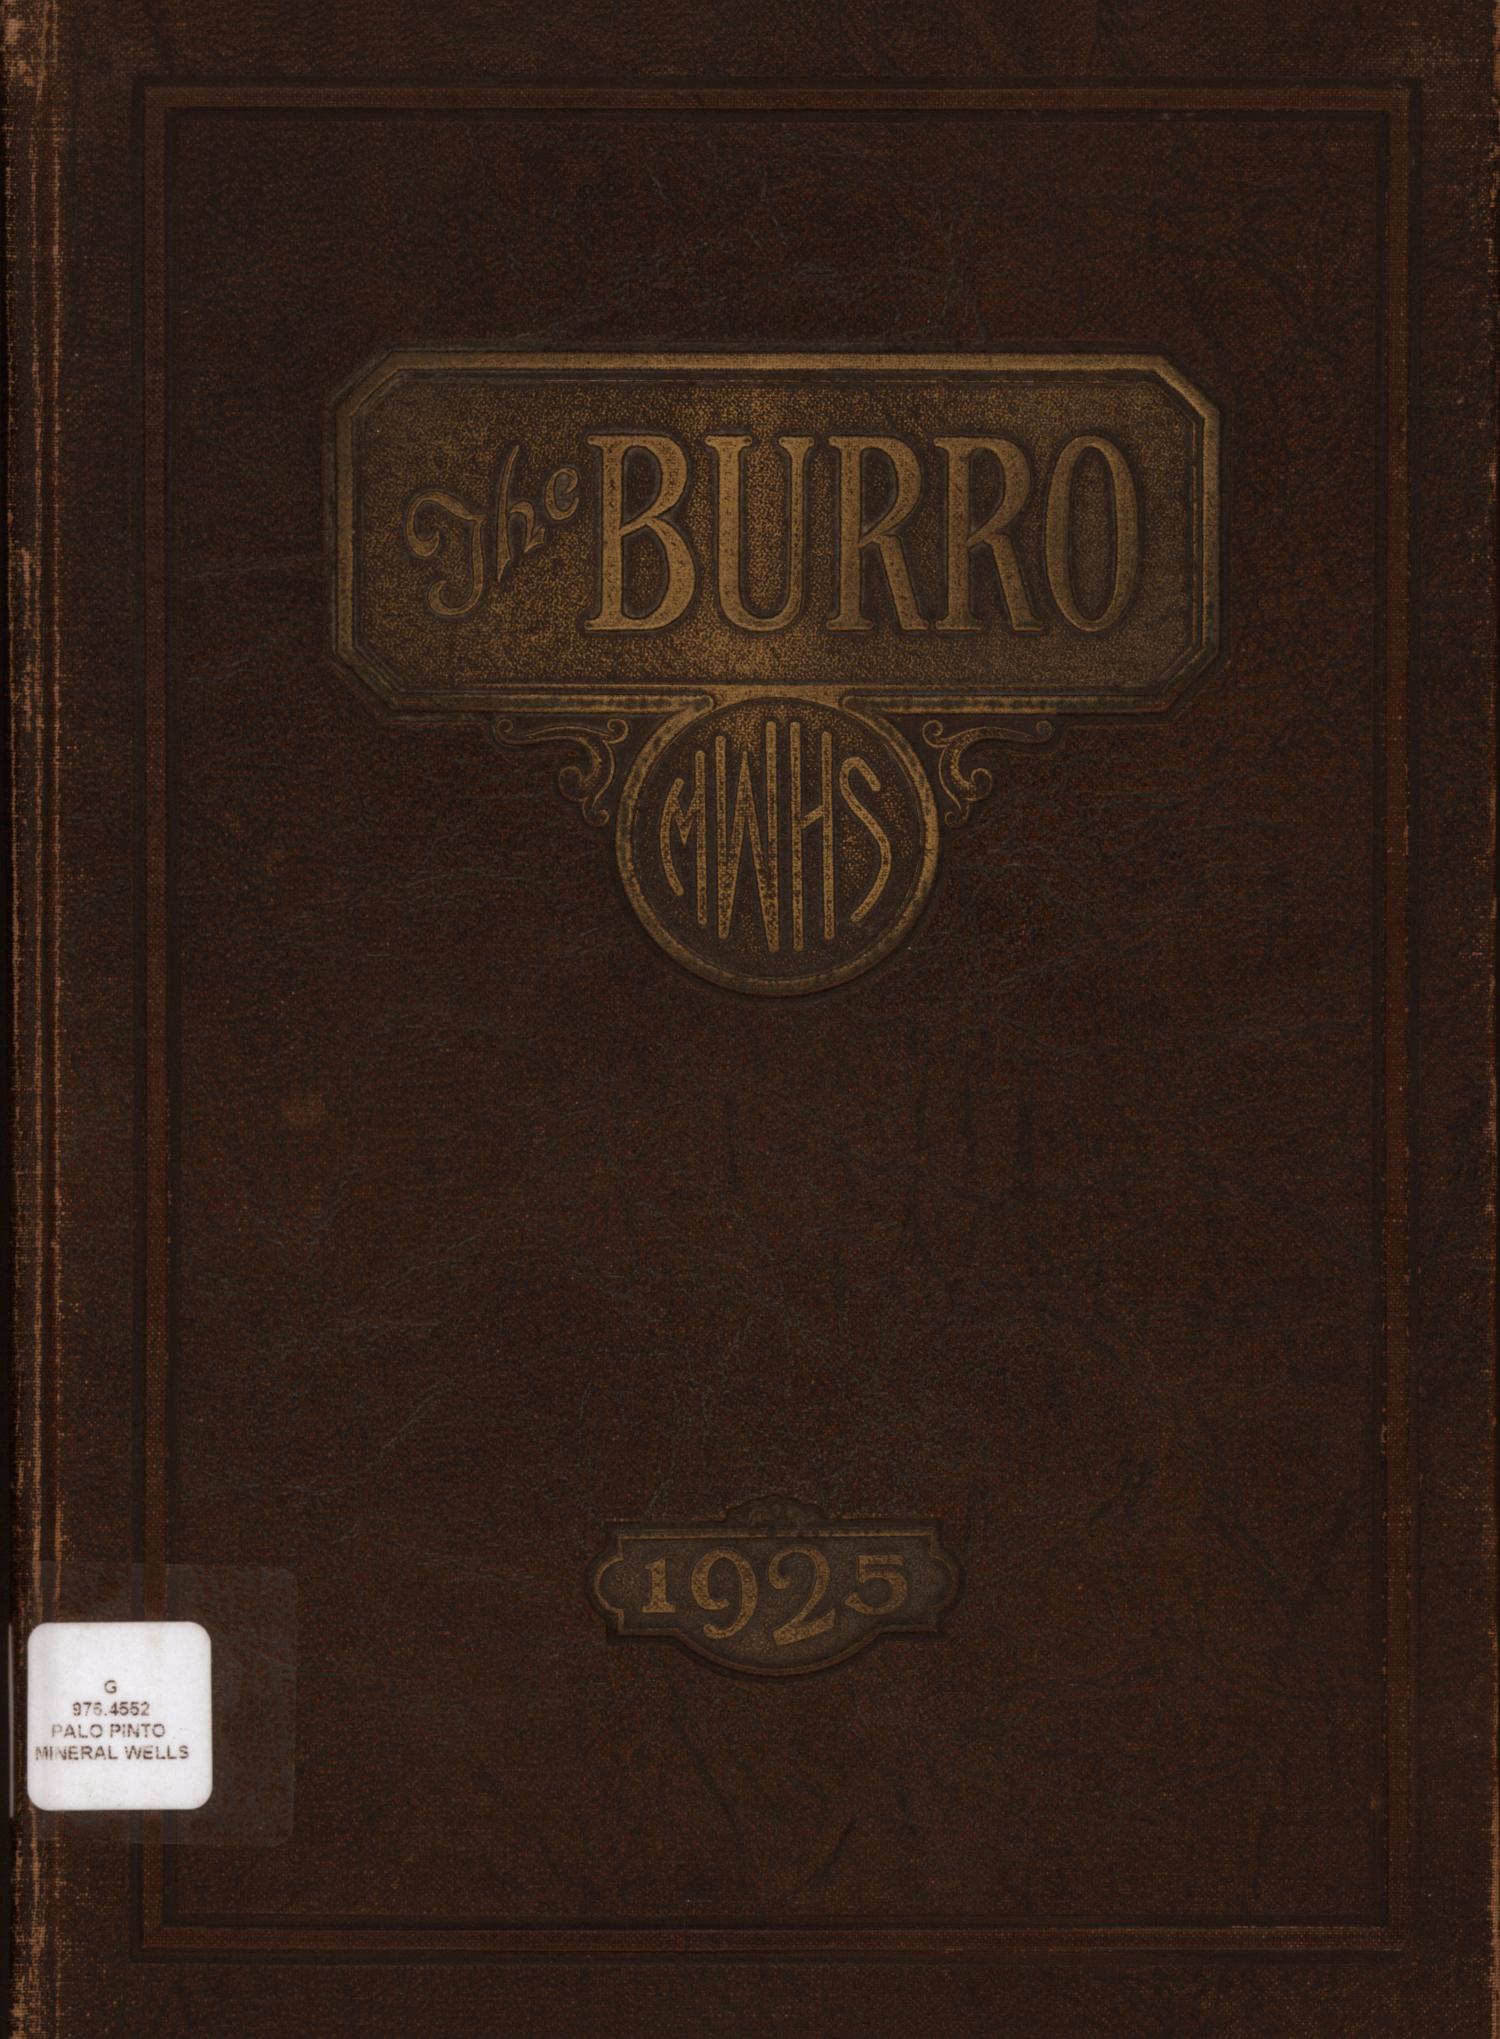 The Burro, Yearbook of Mineral Wells High School, 1925
                                                
                                                    Front Cover
                                                